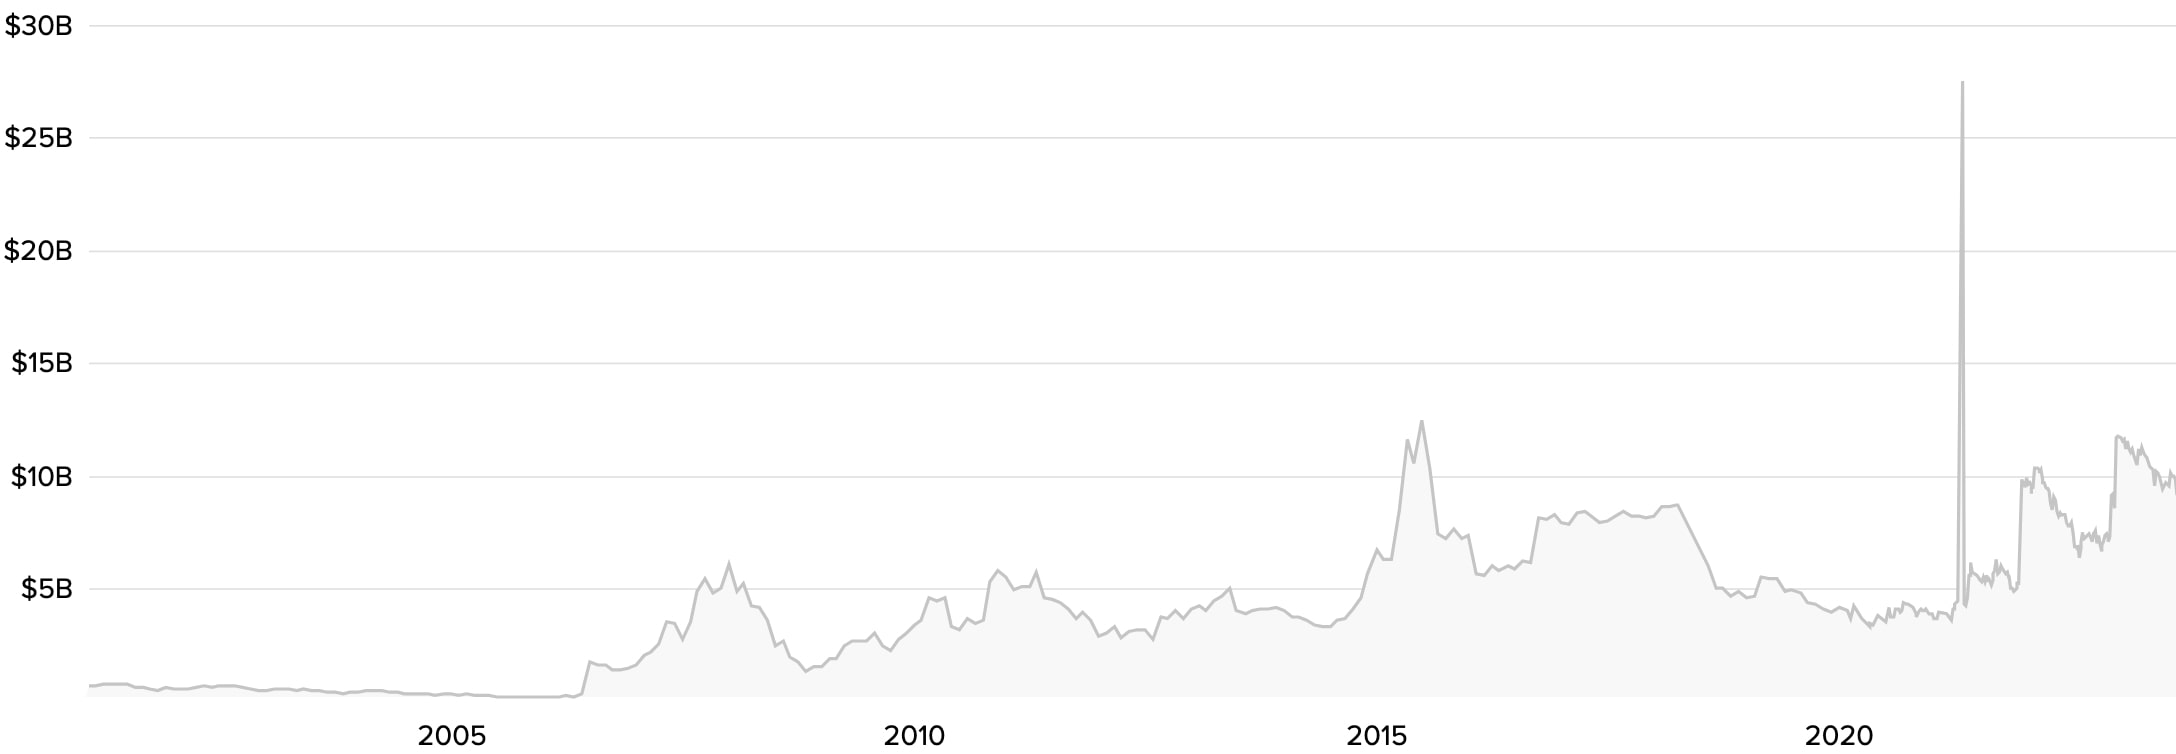 The market capitalization history of Hainan Airlines